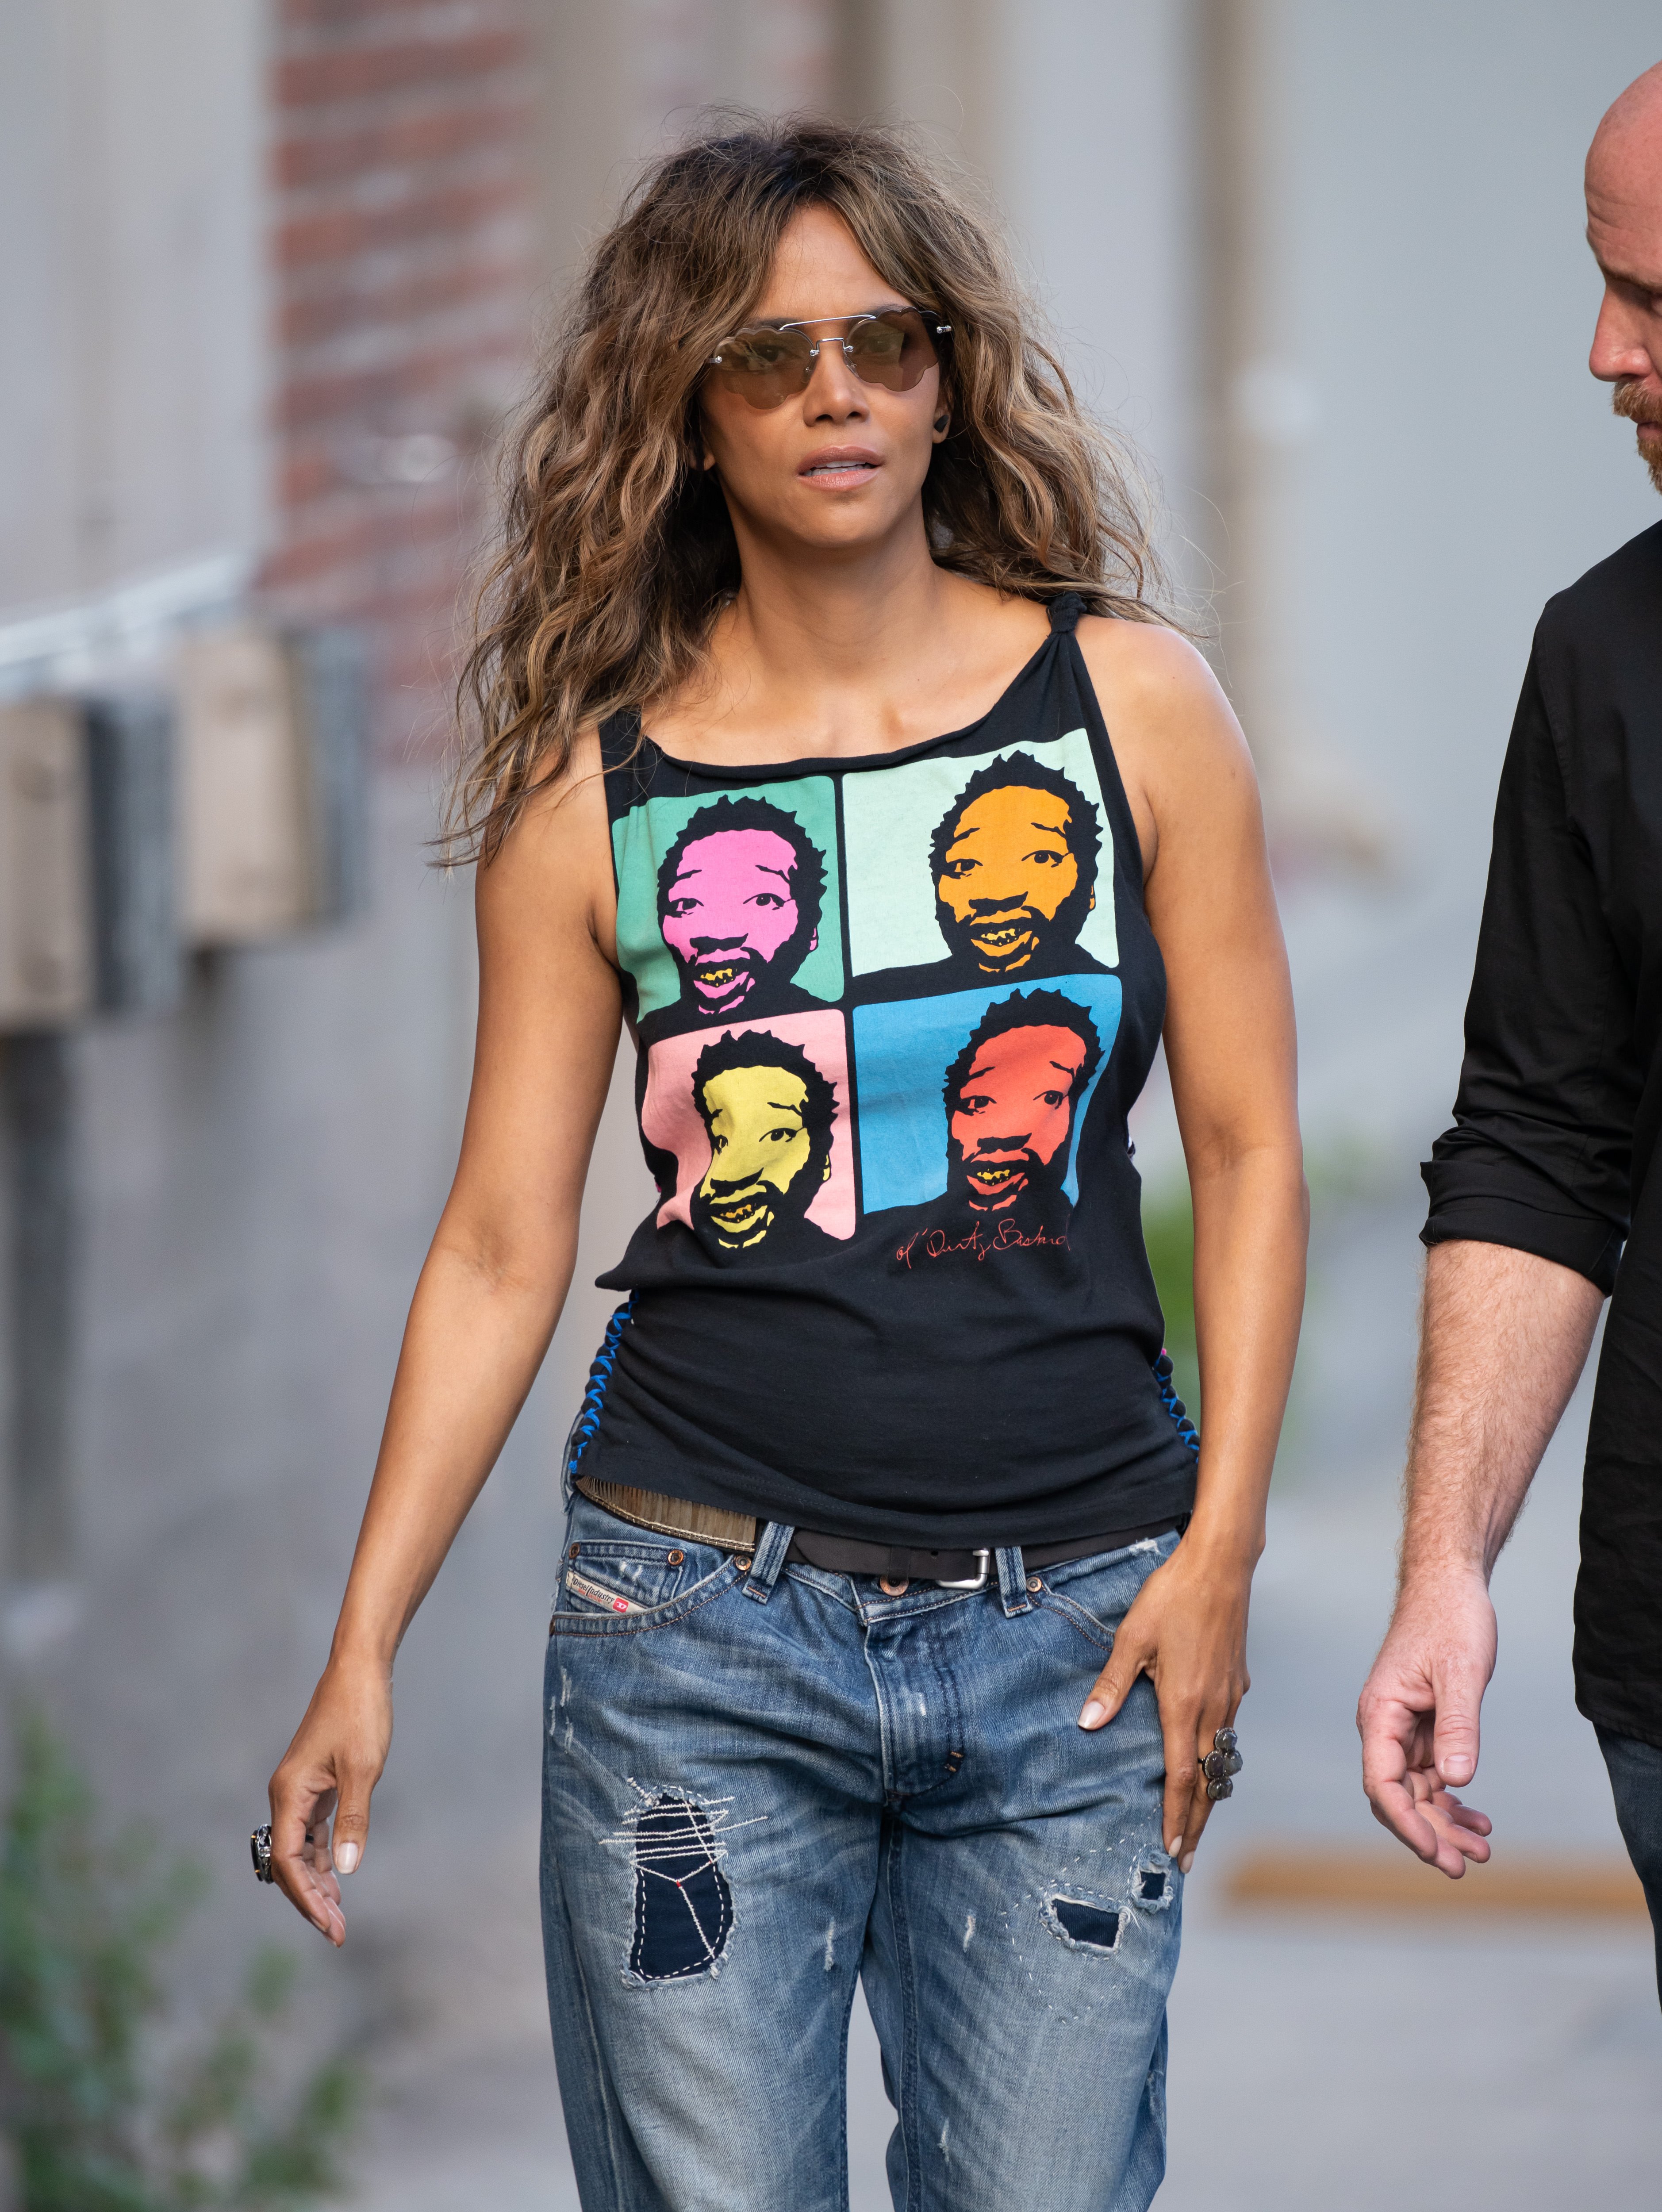 Actress Halle Berry arrives at "Jimmy Kimmel Live" in Los Angeles, California, in May 2019. I Image: Getty Images.